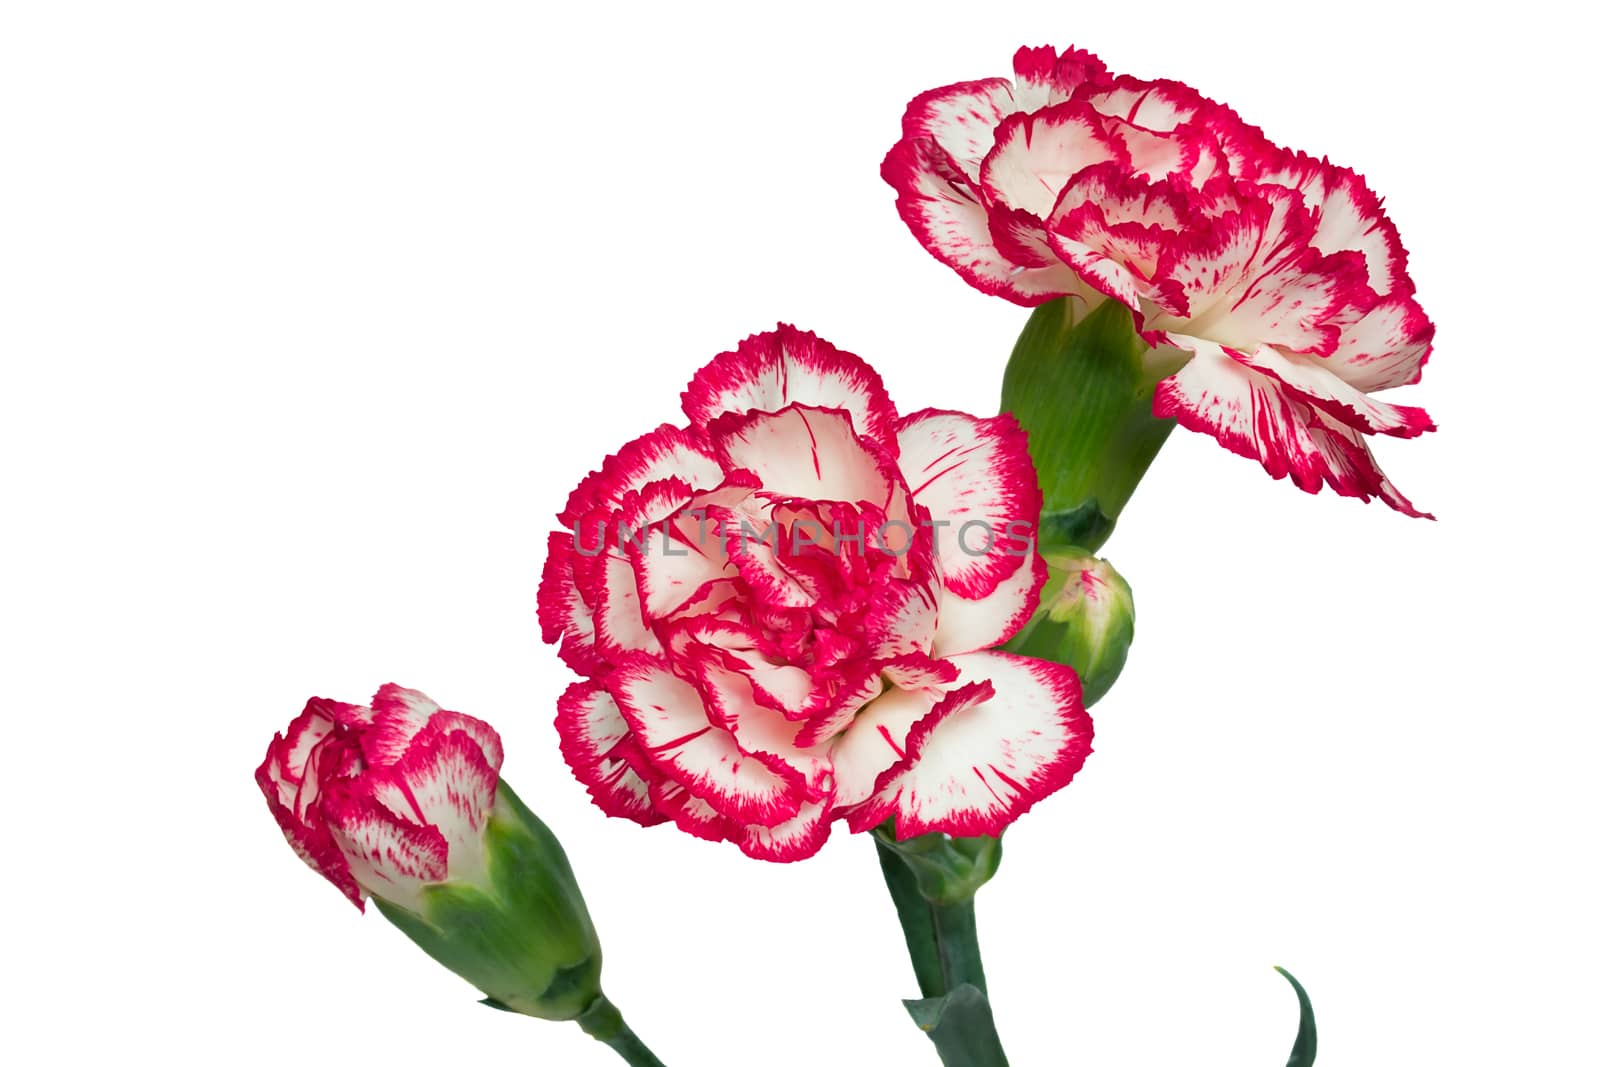 Carnation flowers on a white background. by georgina198